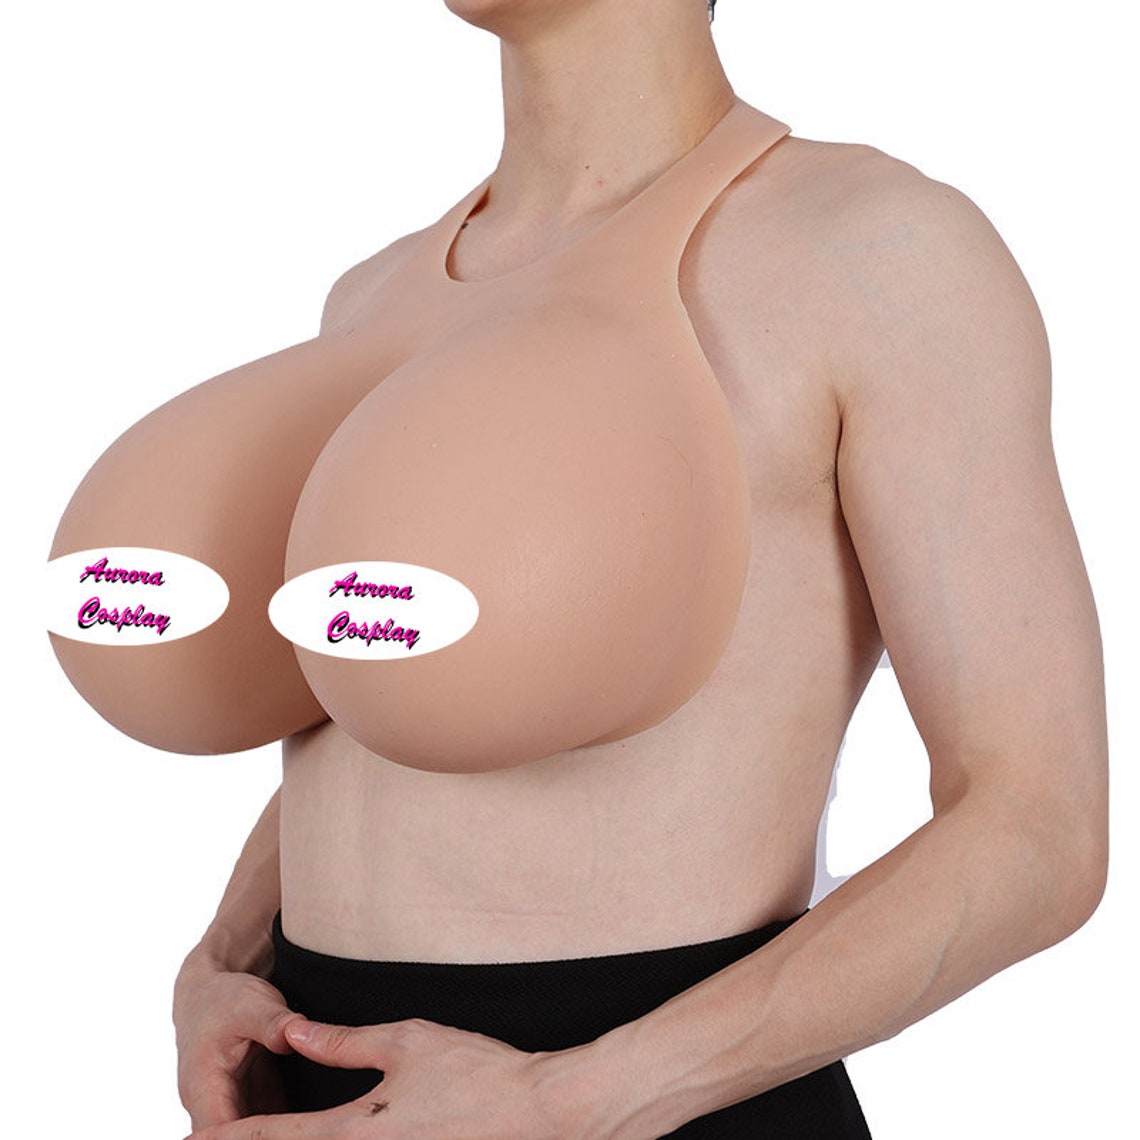 Silicone Breasts Froms Fake Boobs Wearable Backless Pad Enhancers